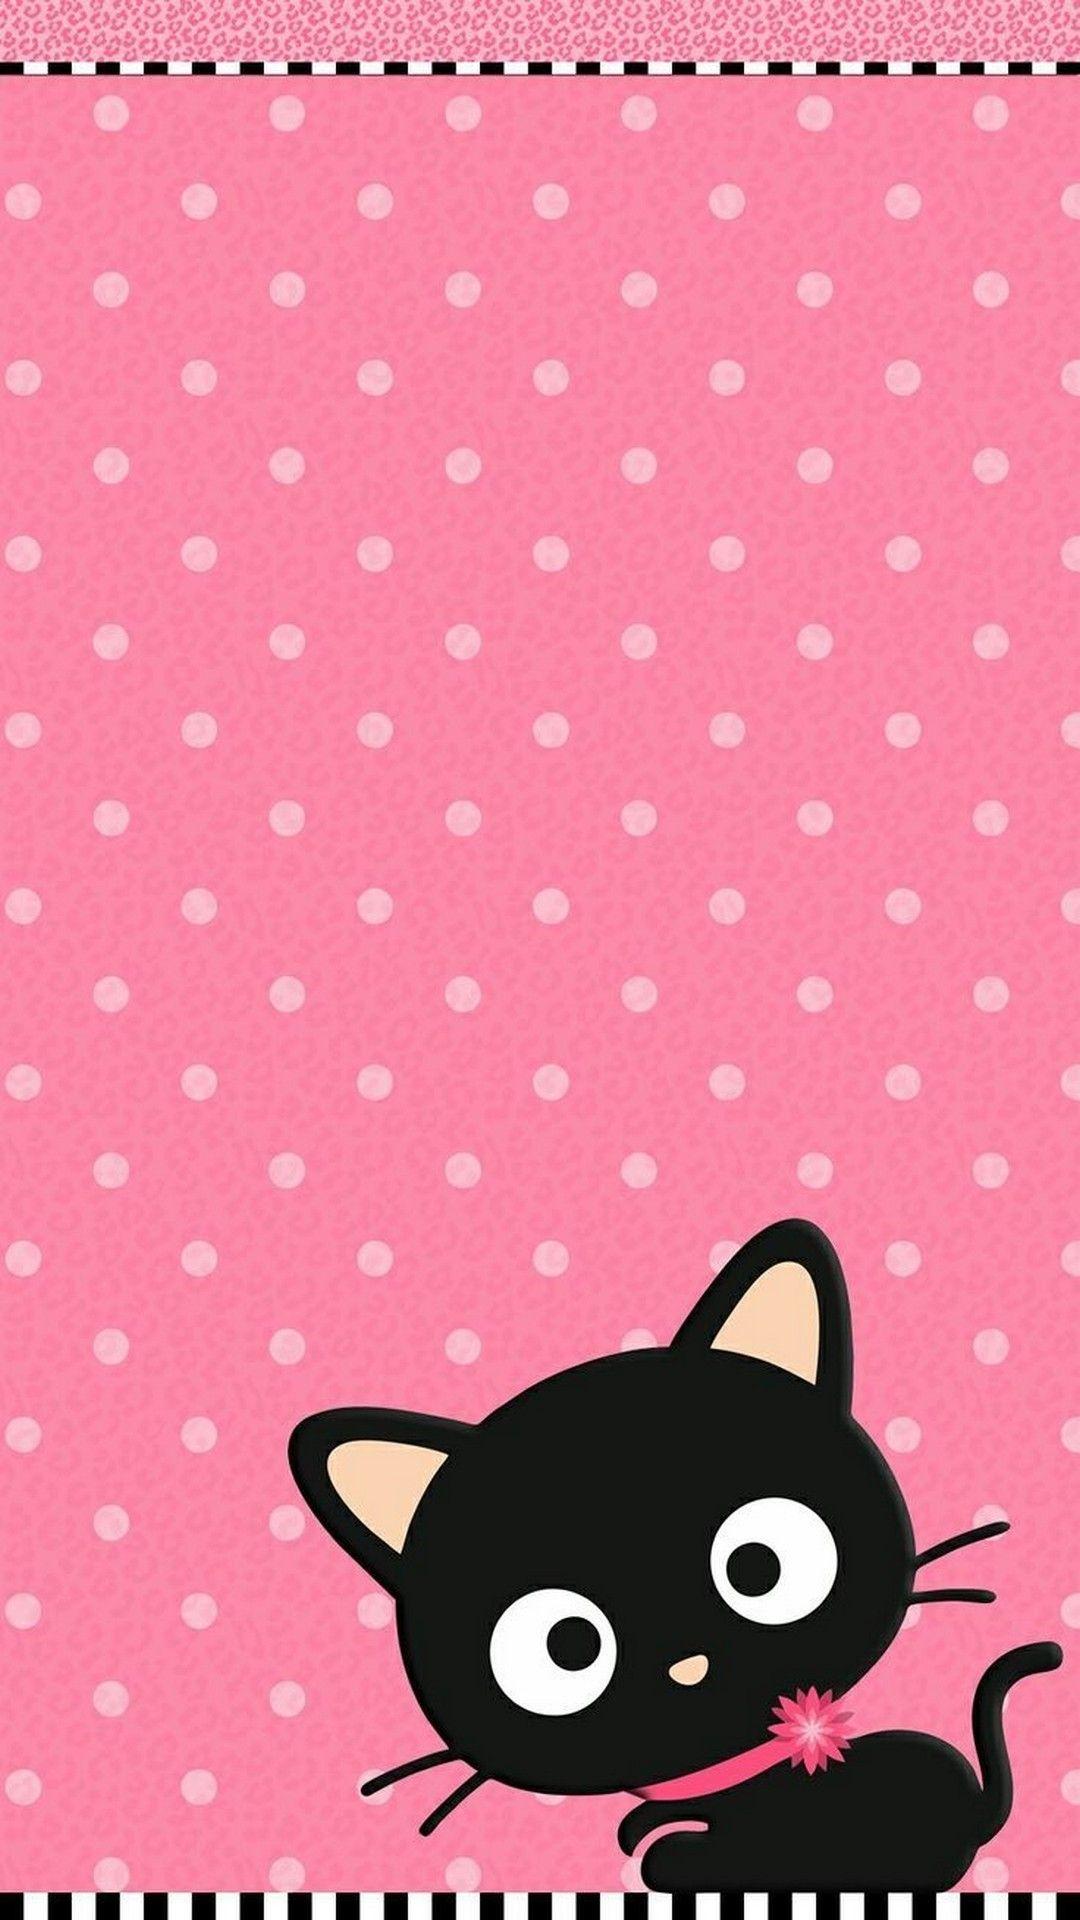 Animated Cat Pink Android Wallpaper Android Wallpaper. Pink wallpaper hello kitty, Pink wallpaper iphone, Cat pattern wallpaper